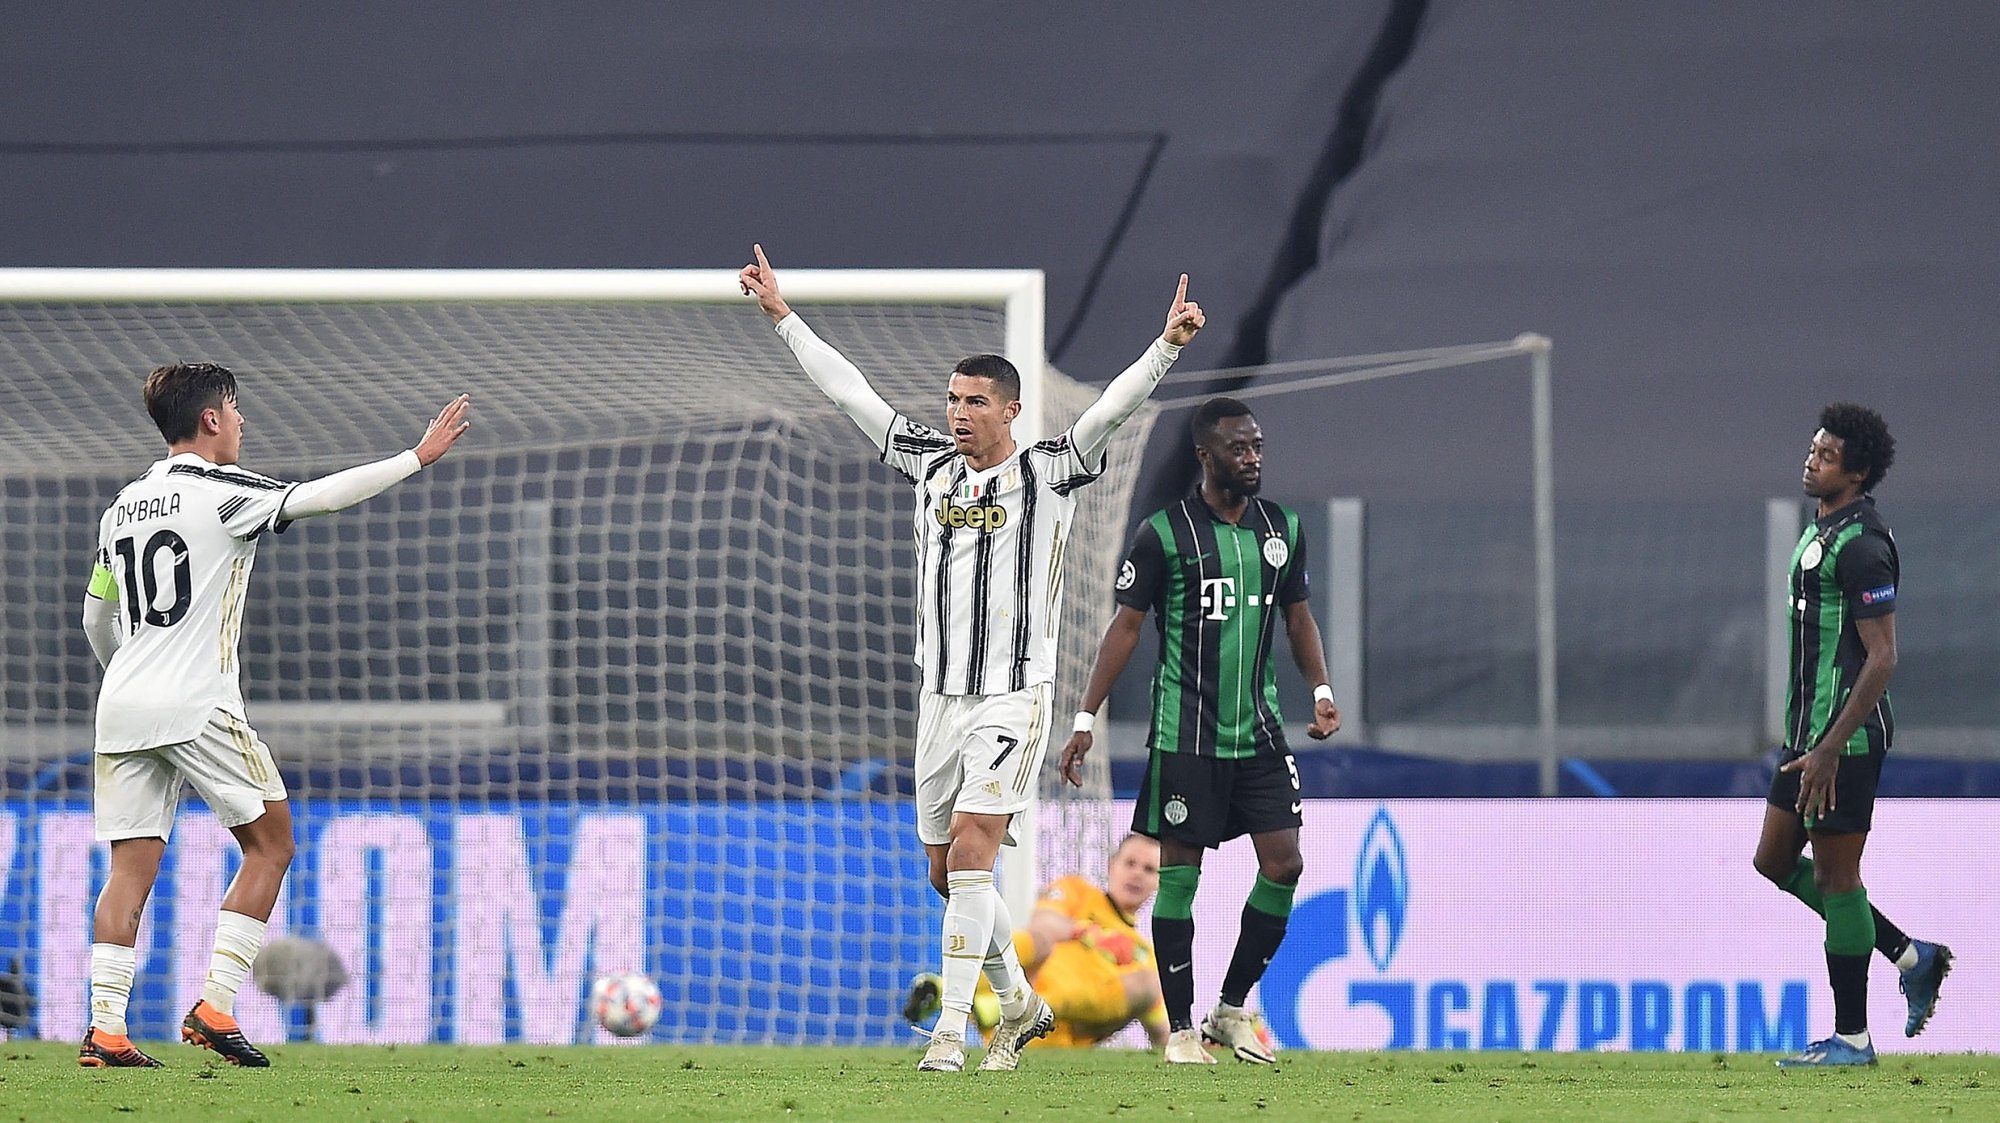 epa08839998 Juventusâ€™ Cristiano Ronaldo (C) celebrates after scoring his team&#039;s first goal during the UEFA Champions League group G soccer match Juventus FC vs Ferencvaros at the Allianz stadium in Turin, Italy, 24 November 2020.  EPA/ALESSANDRO DI MARCO